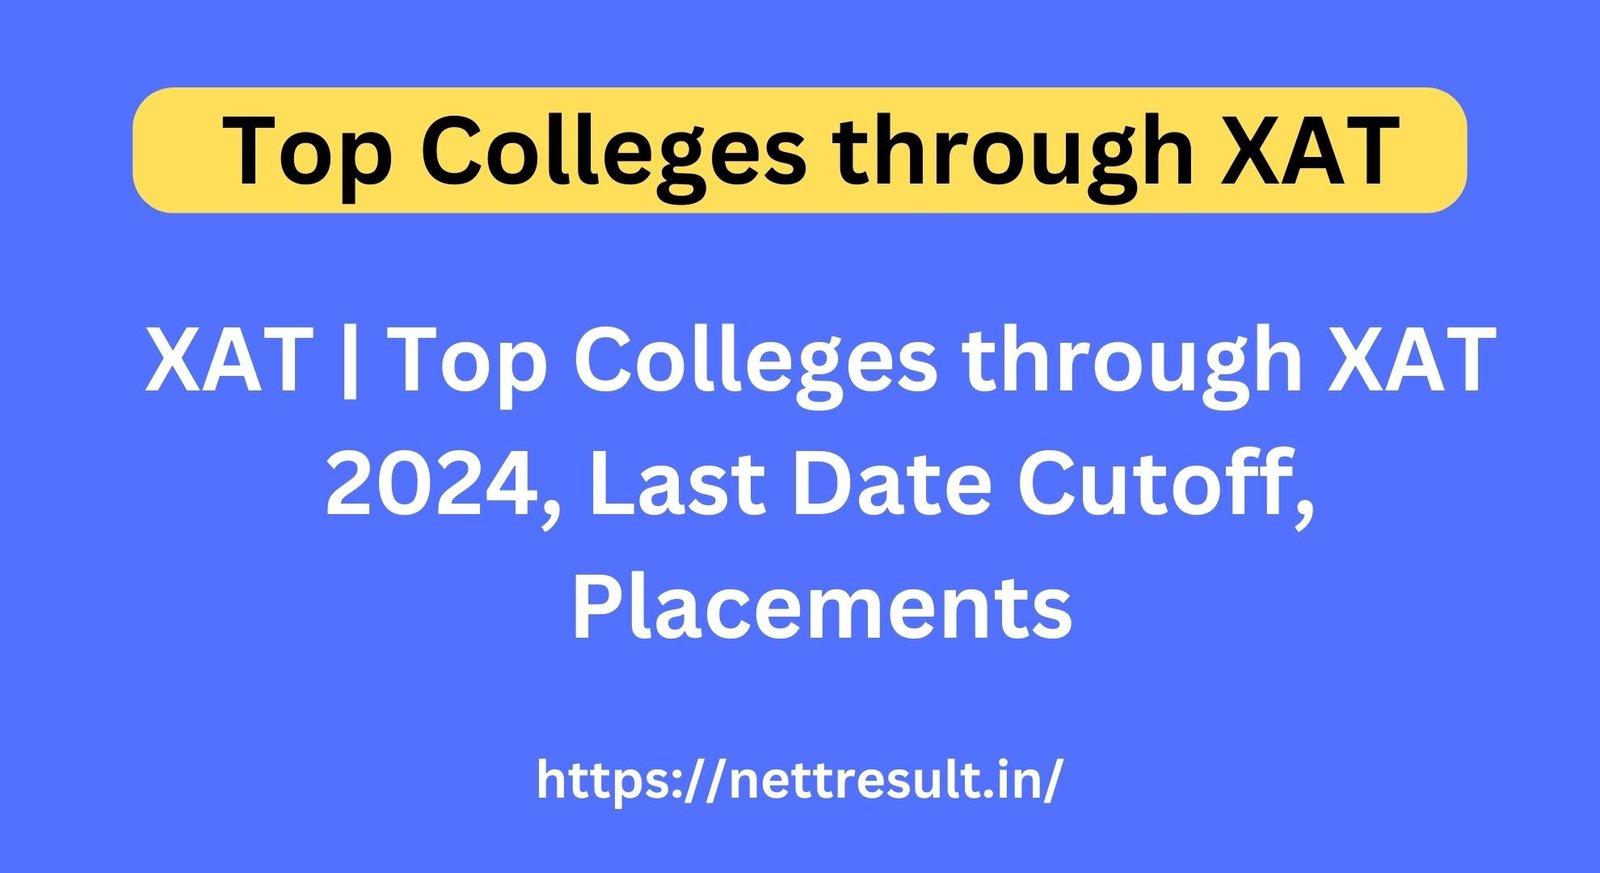 Top Colleges through XAT